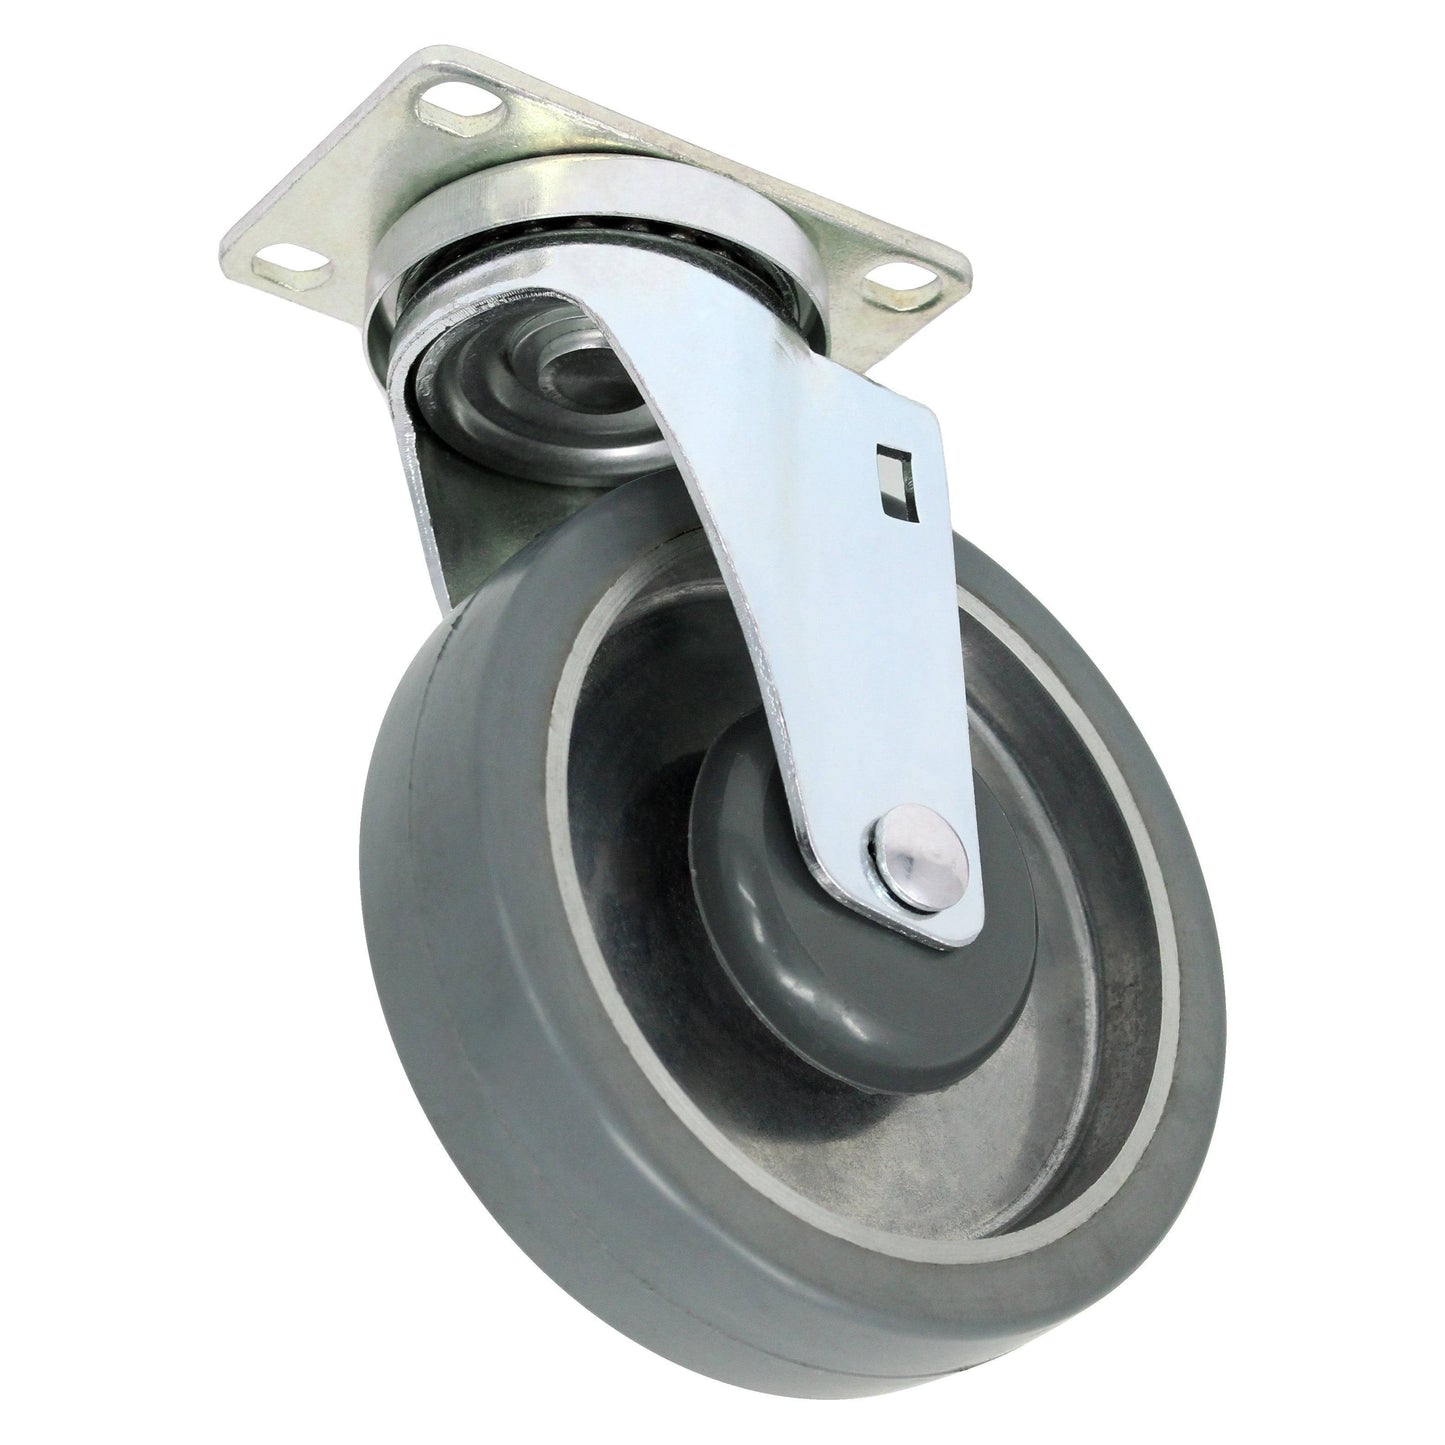 5" x 1-1/4" Mold-On Rubber Aluminum Wheel Swivel Caster - 325 lbs. capacity - Durable Superior Casters